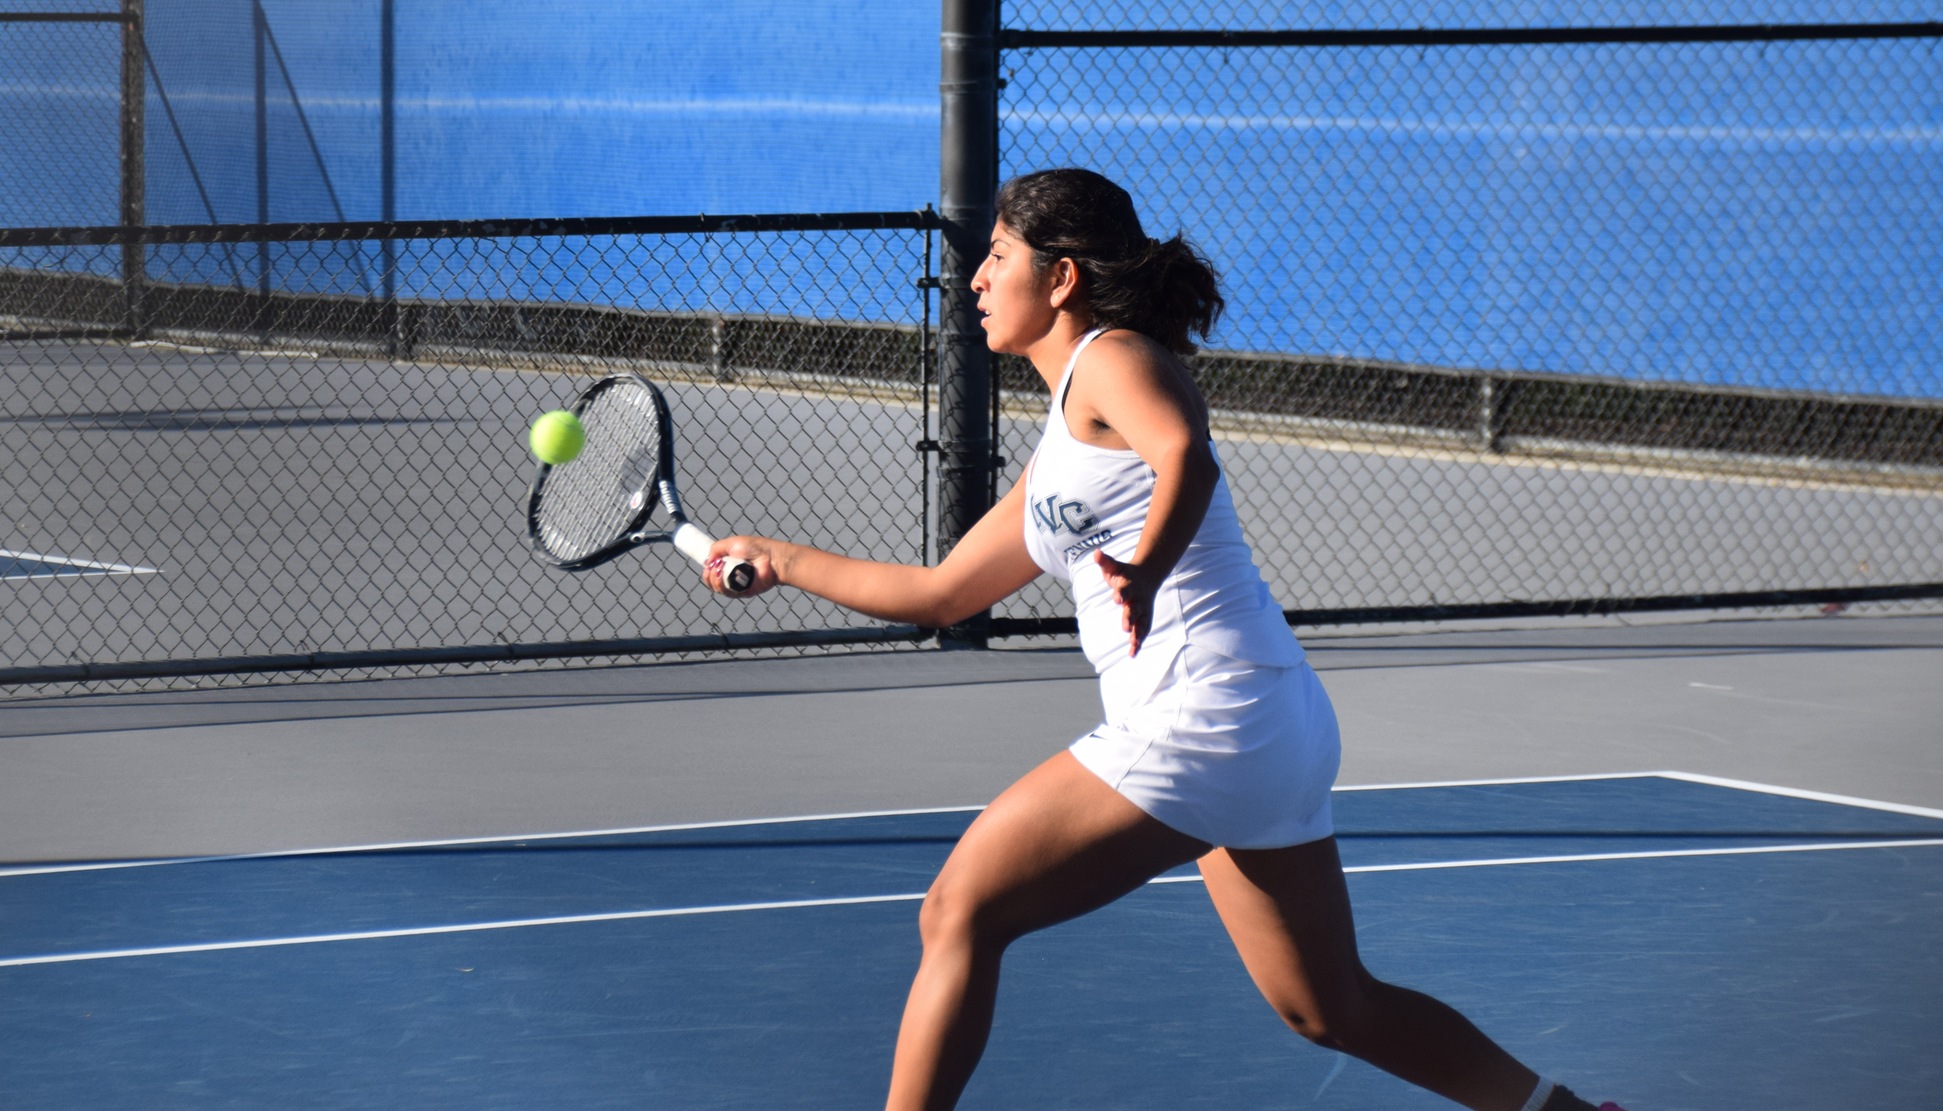 Women's tennis team earns 7-2 conference win at Fullerton